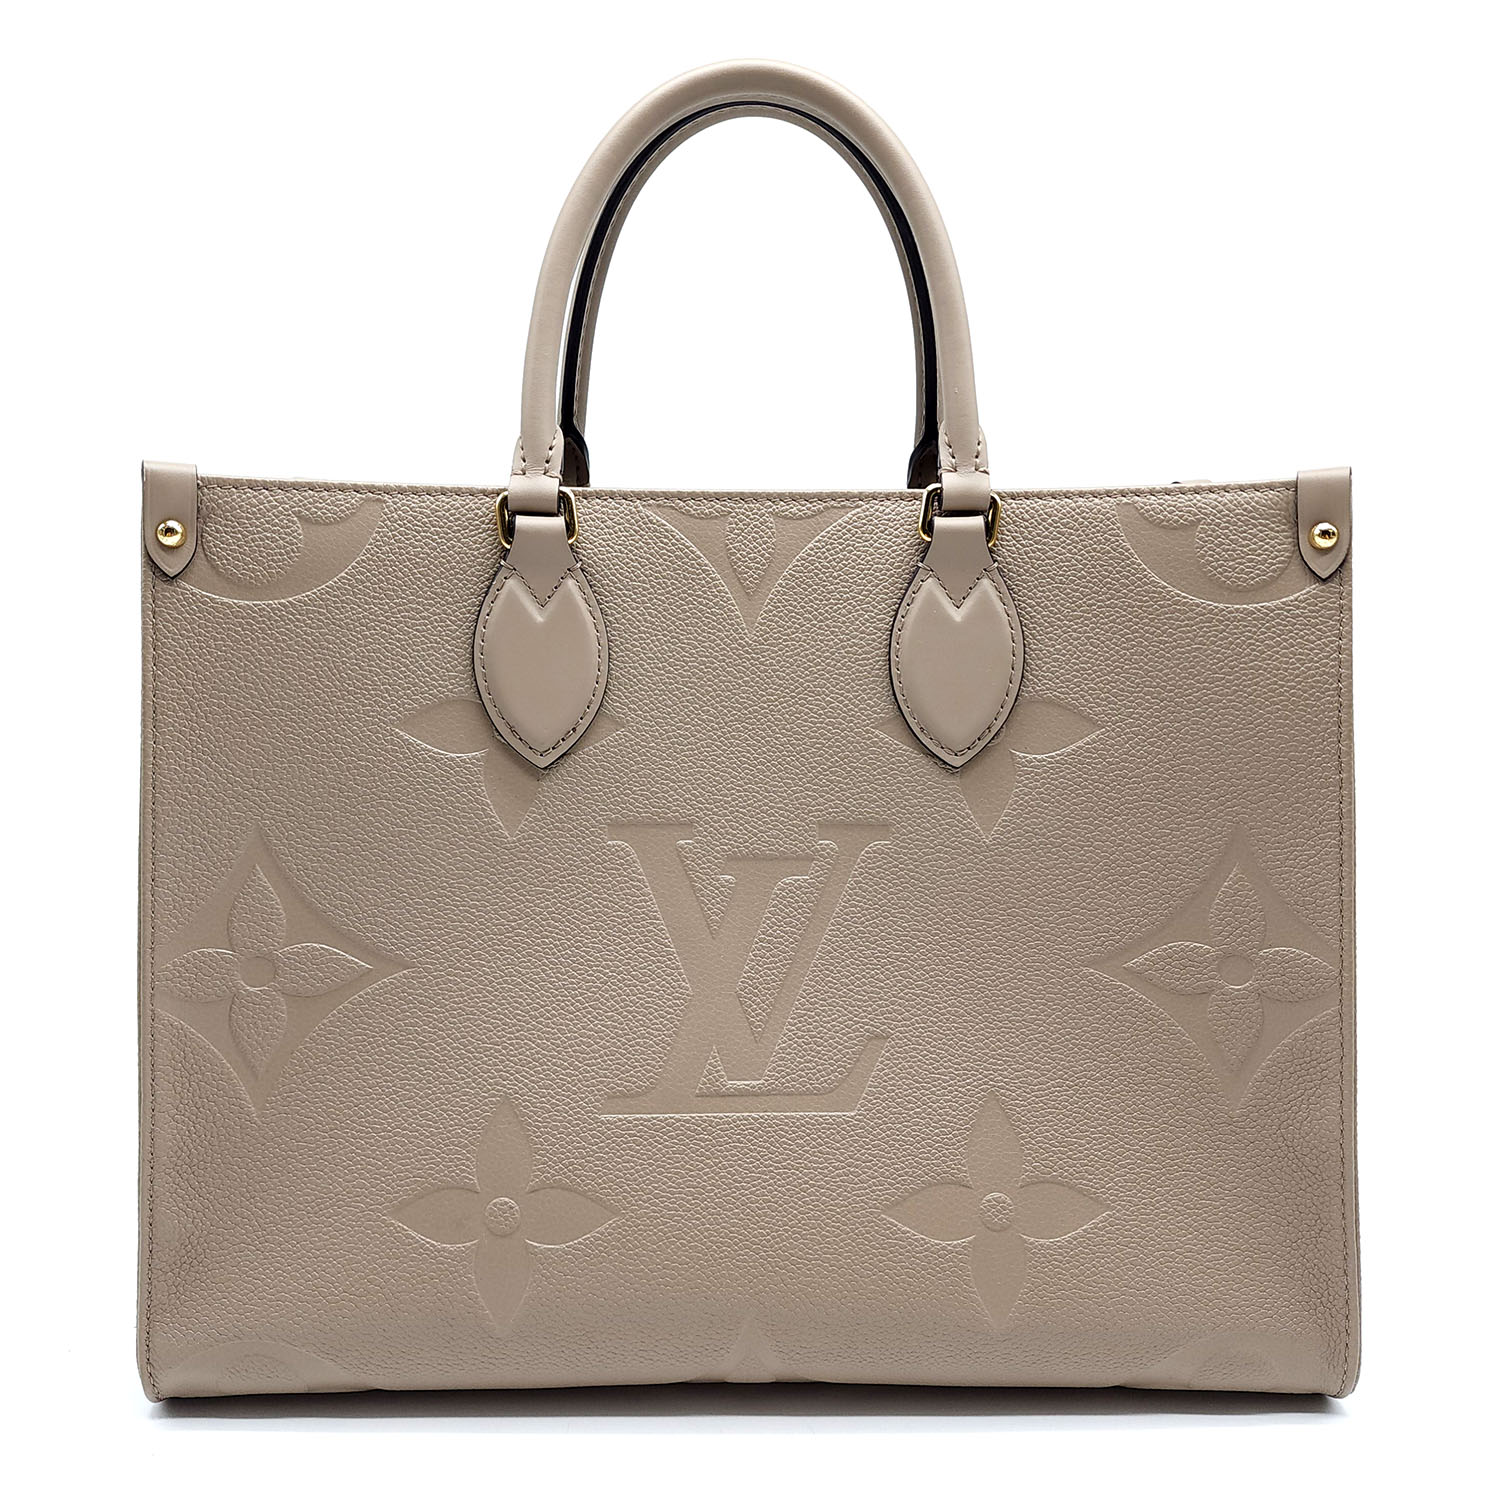 Louis Vuitton OnTheGo Tote MM Turtle Dove Brand New Rare!